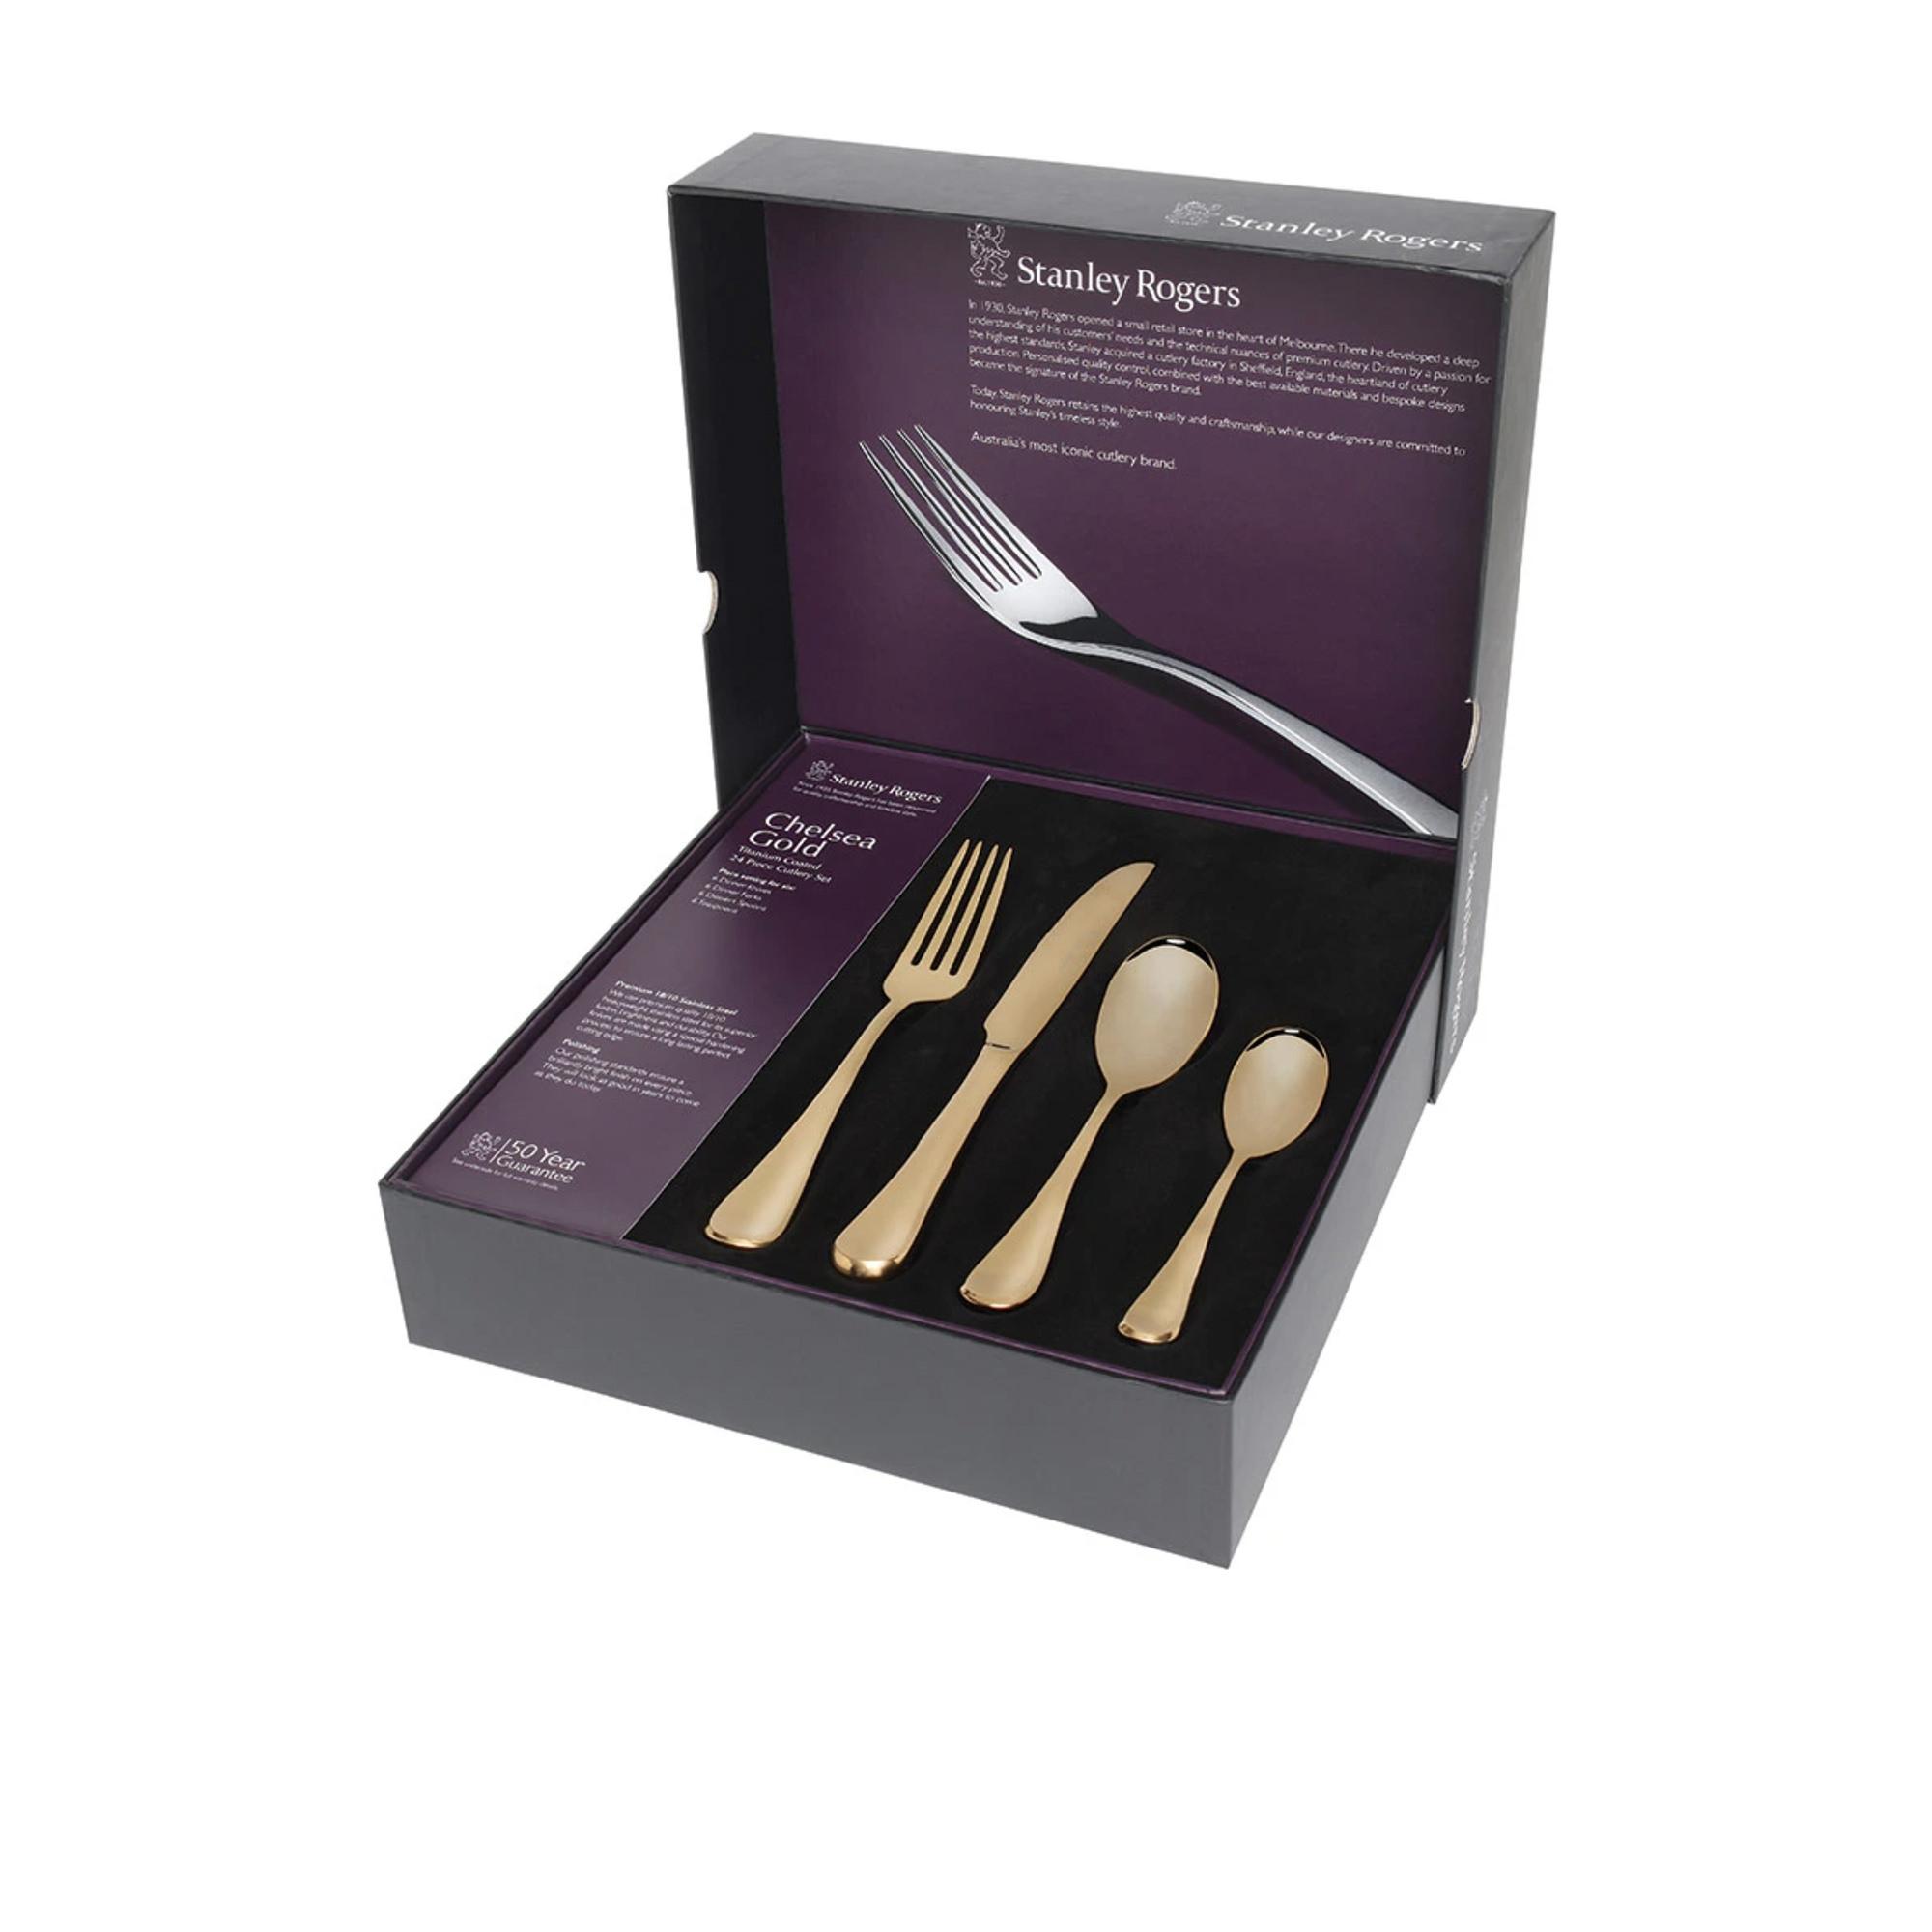 Stanley Rogers Chelsea Cutlery Set 24pc Gold Image 4